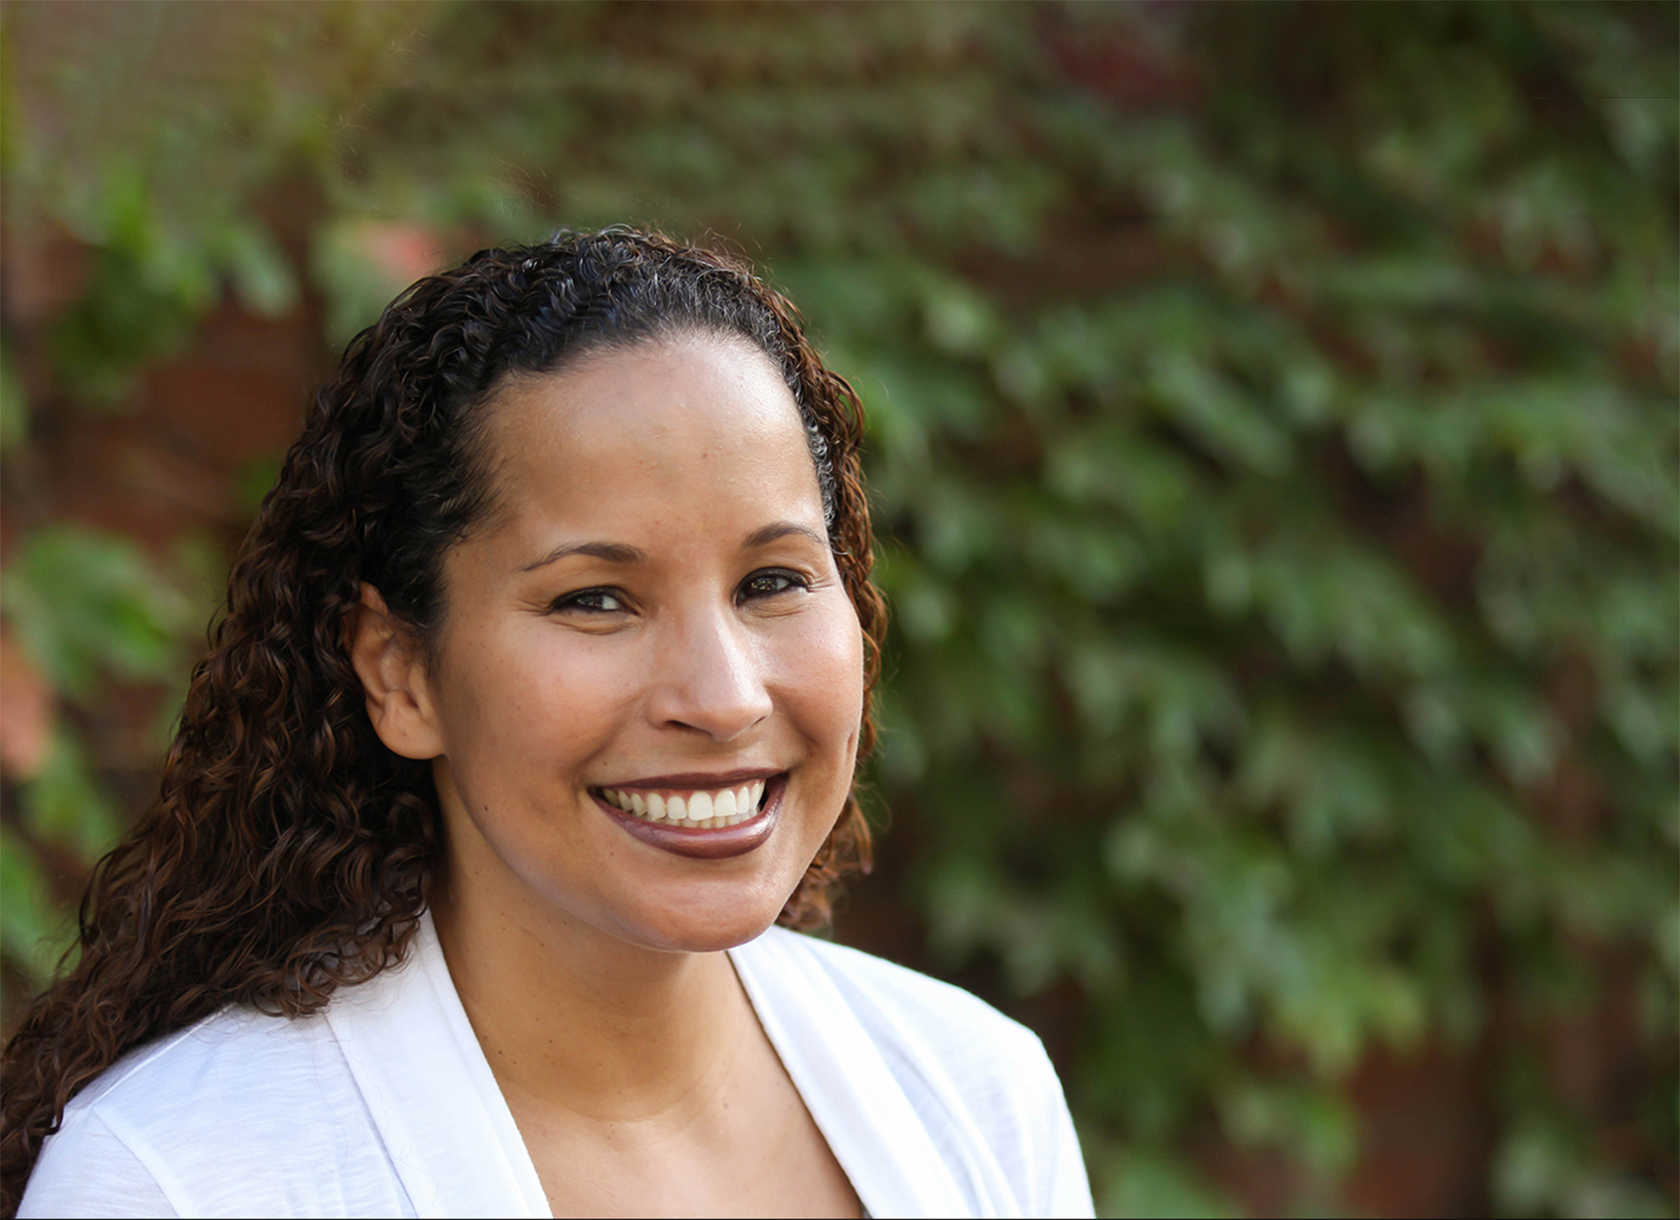 A headshot of a black woman with long, curly hair and a white blazer smiling at the camera.